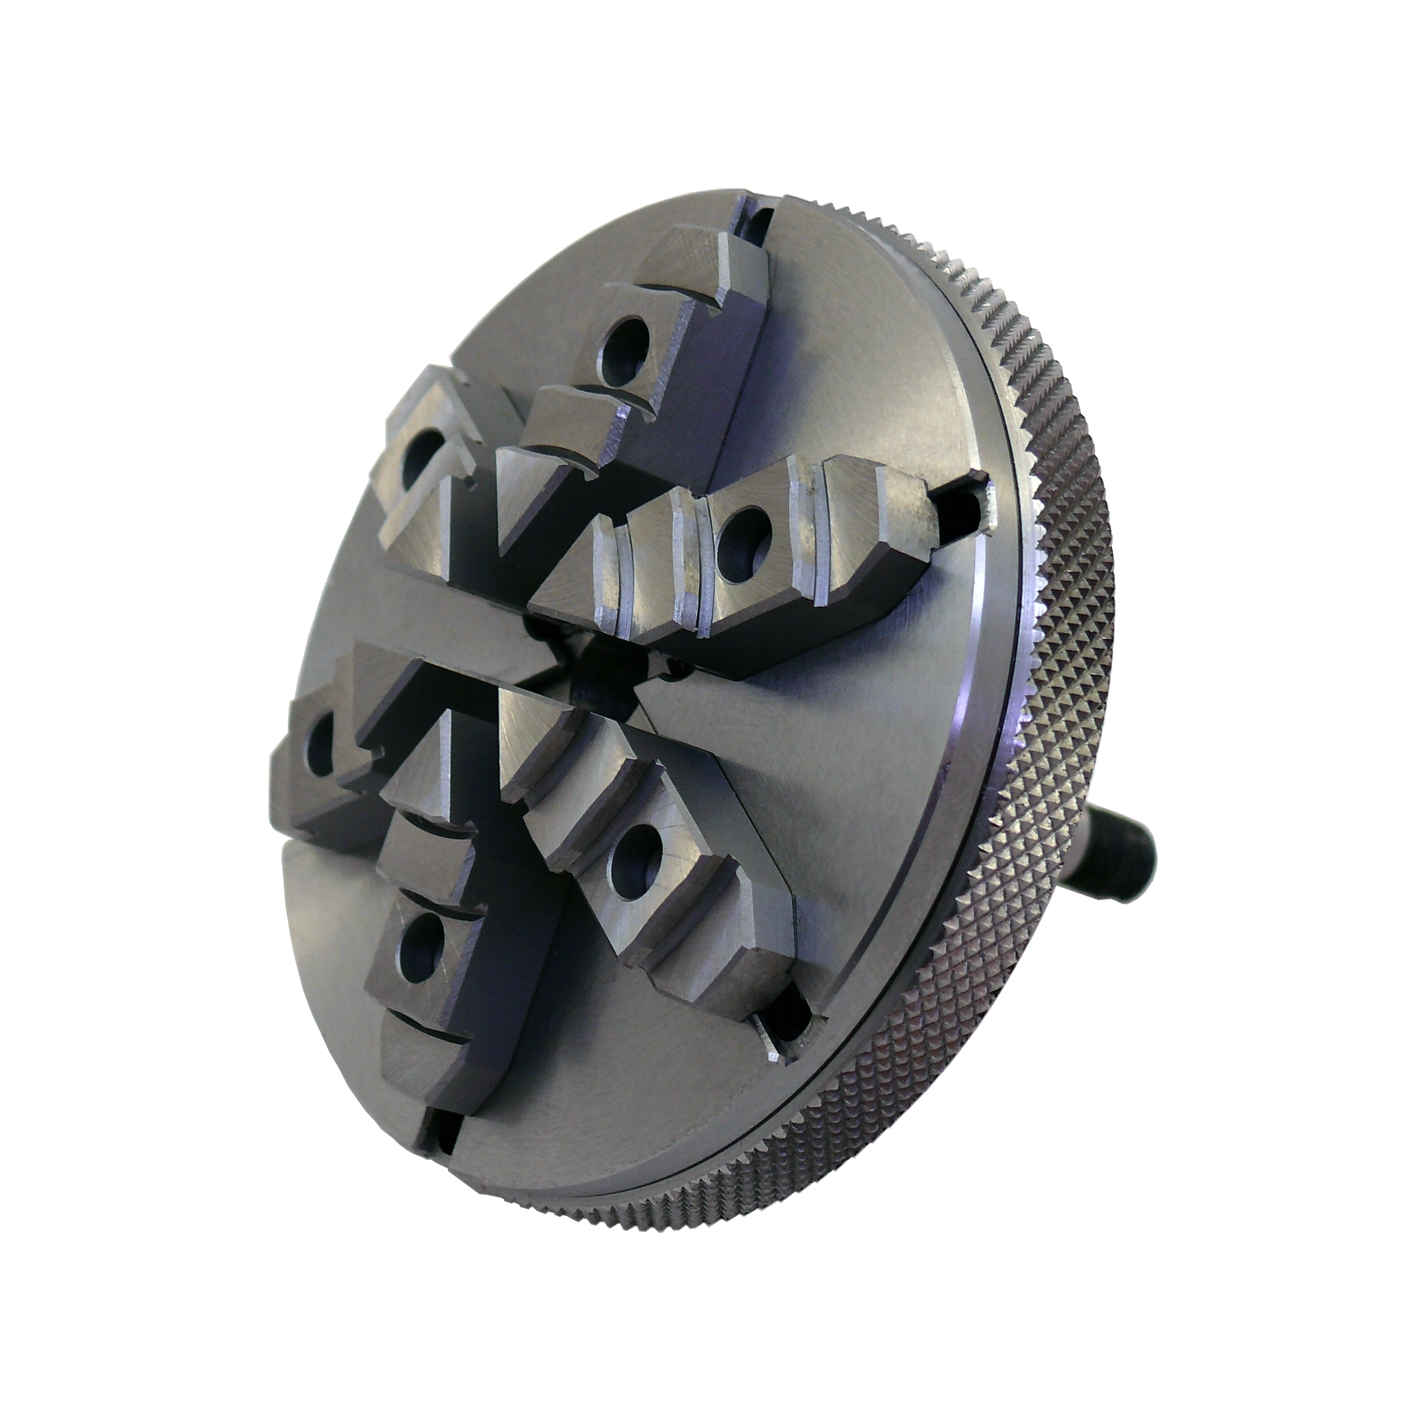 Six-jaw chuck with hardened jaws Vector